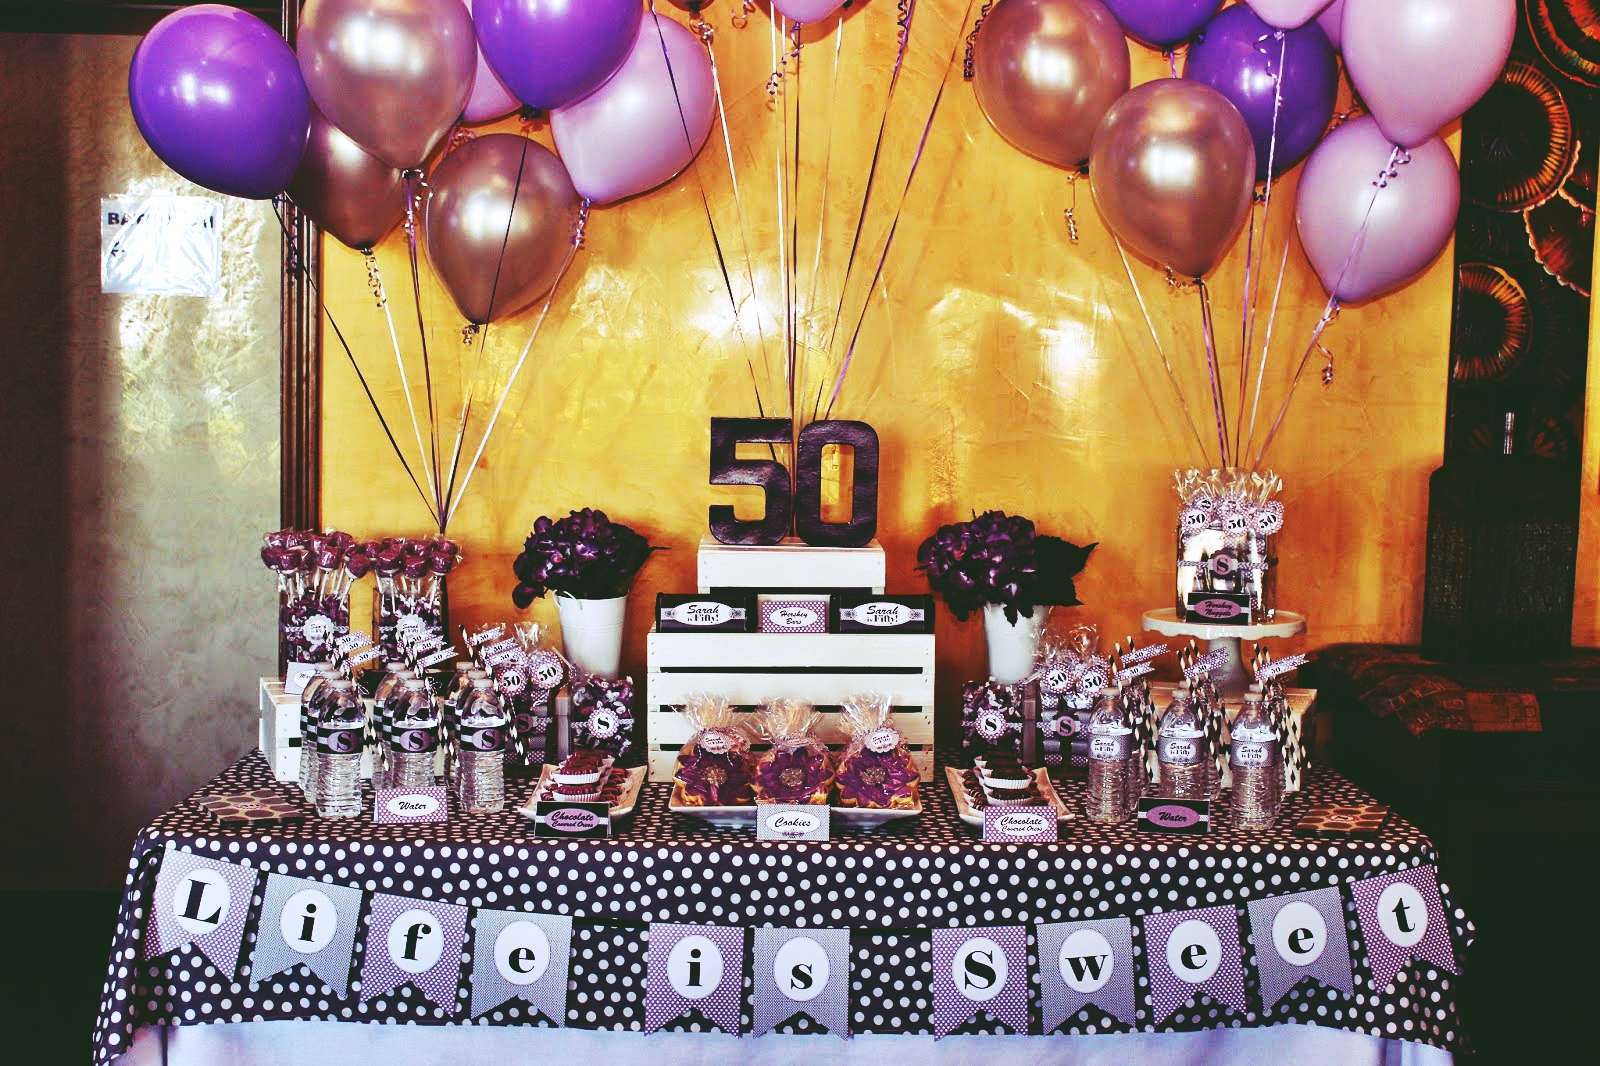 50th birthday party themes 1